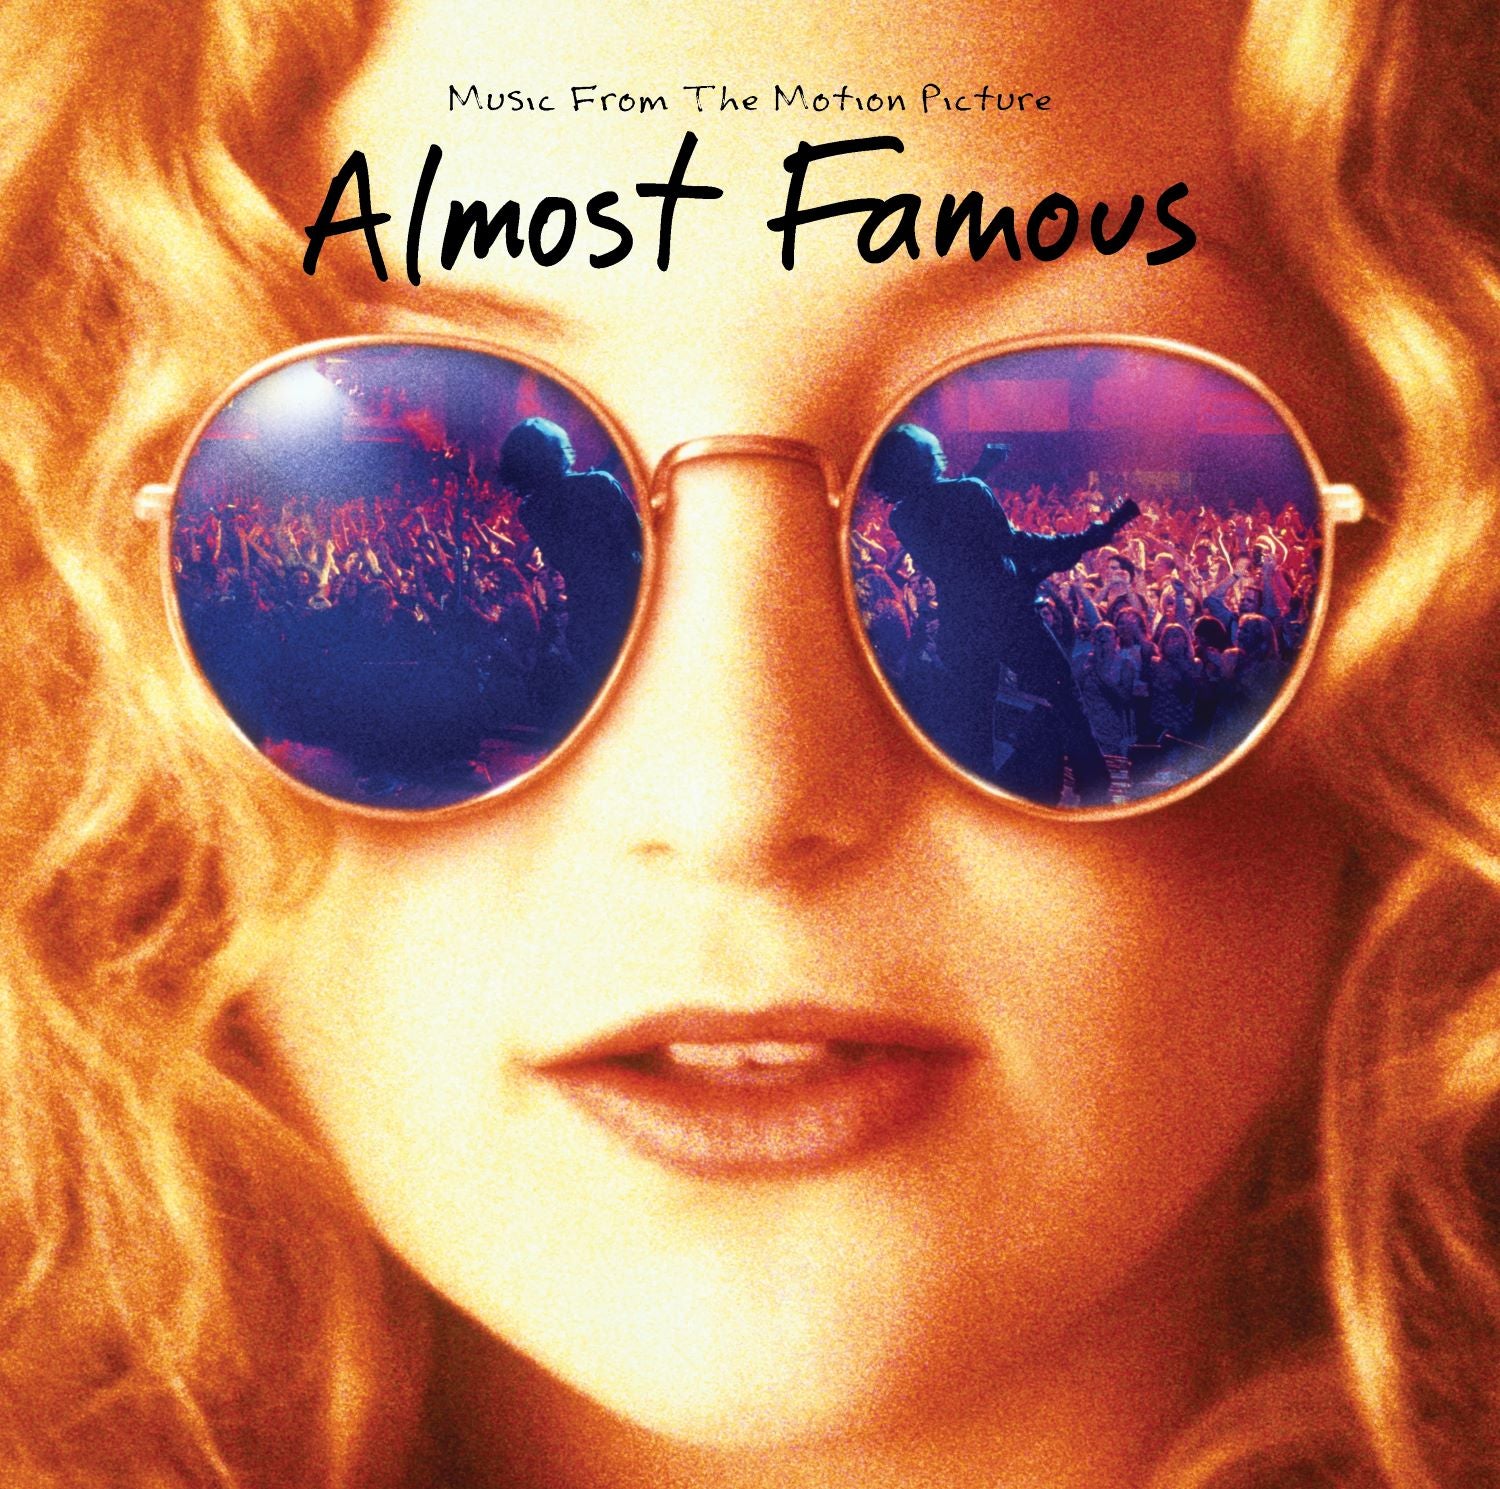 Almost Famous - Vinyl Soundtrack – At The Movies Shop